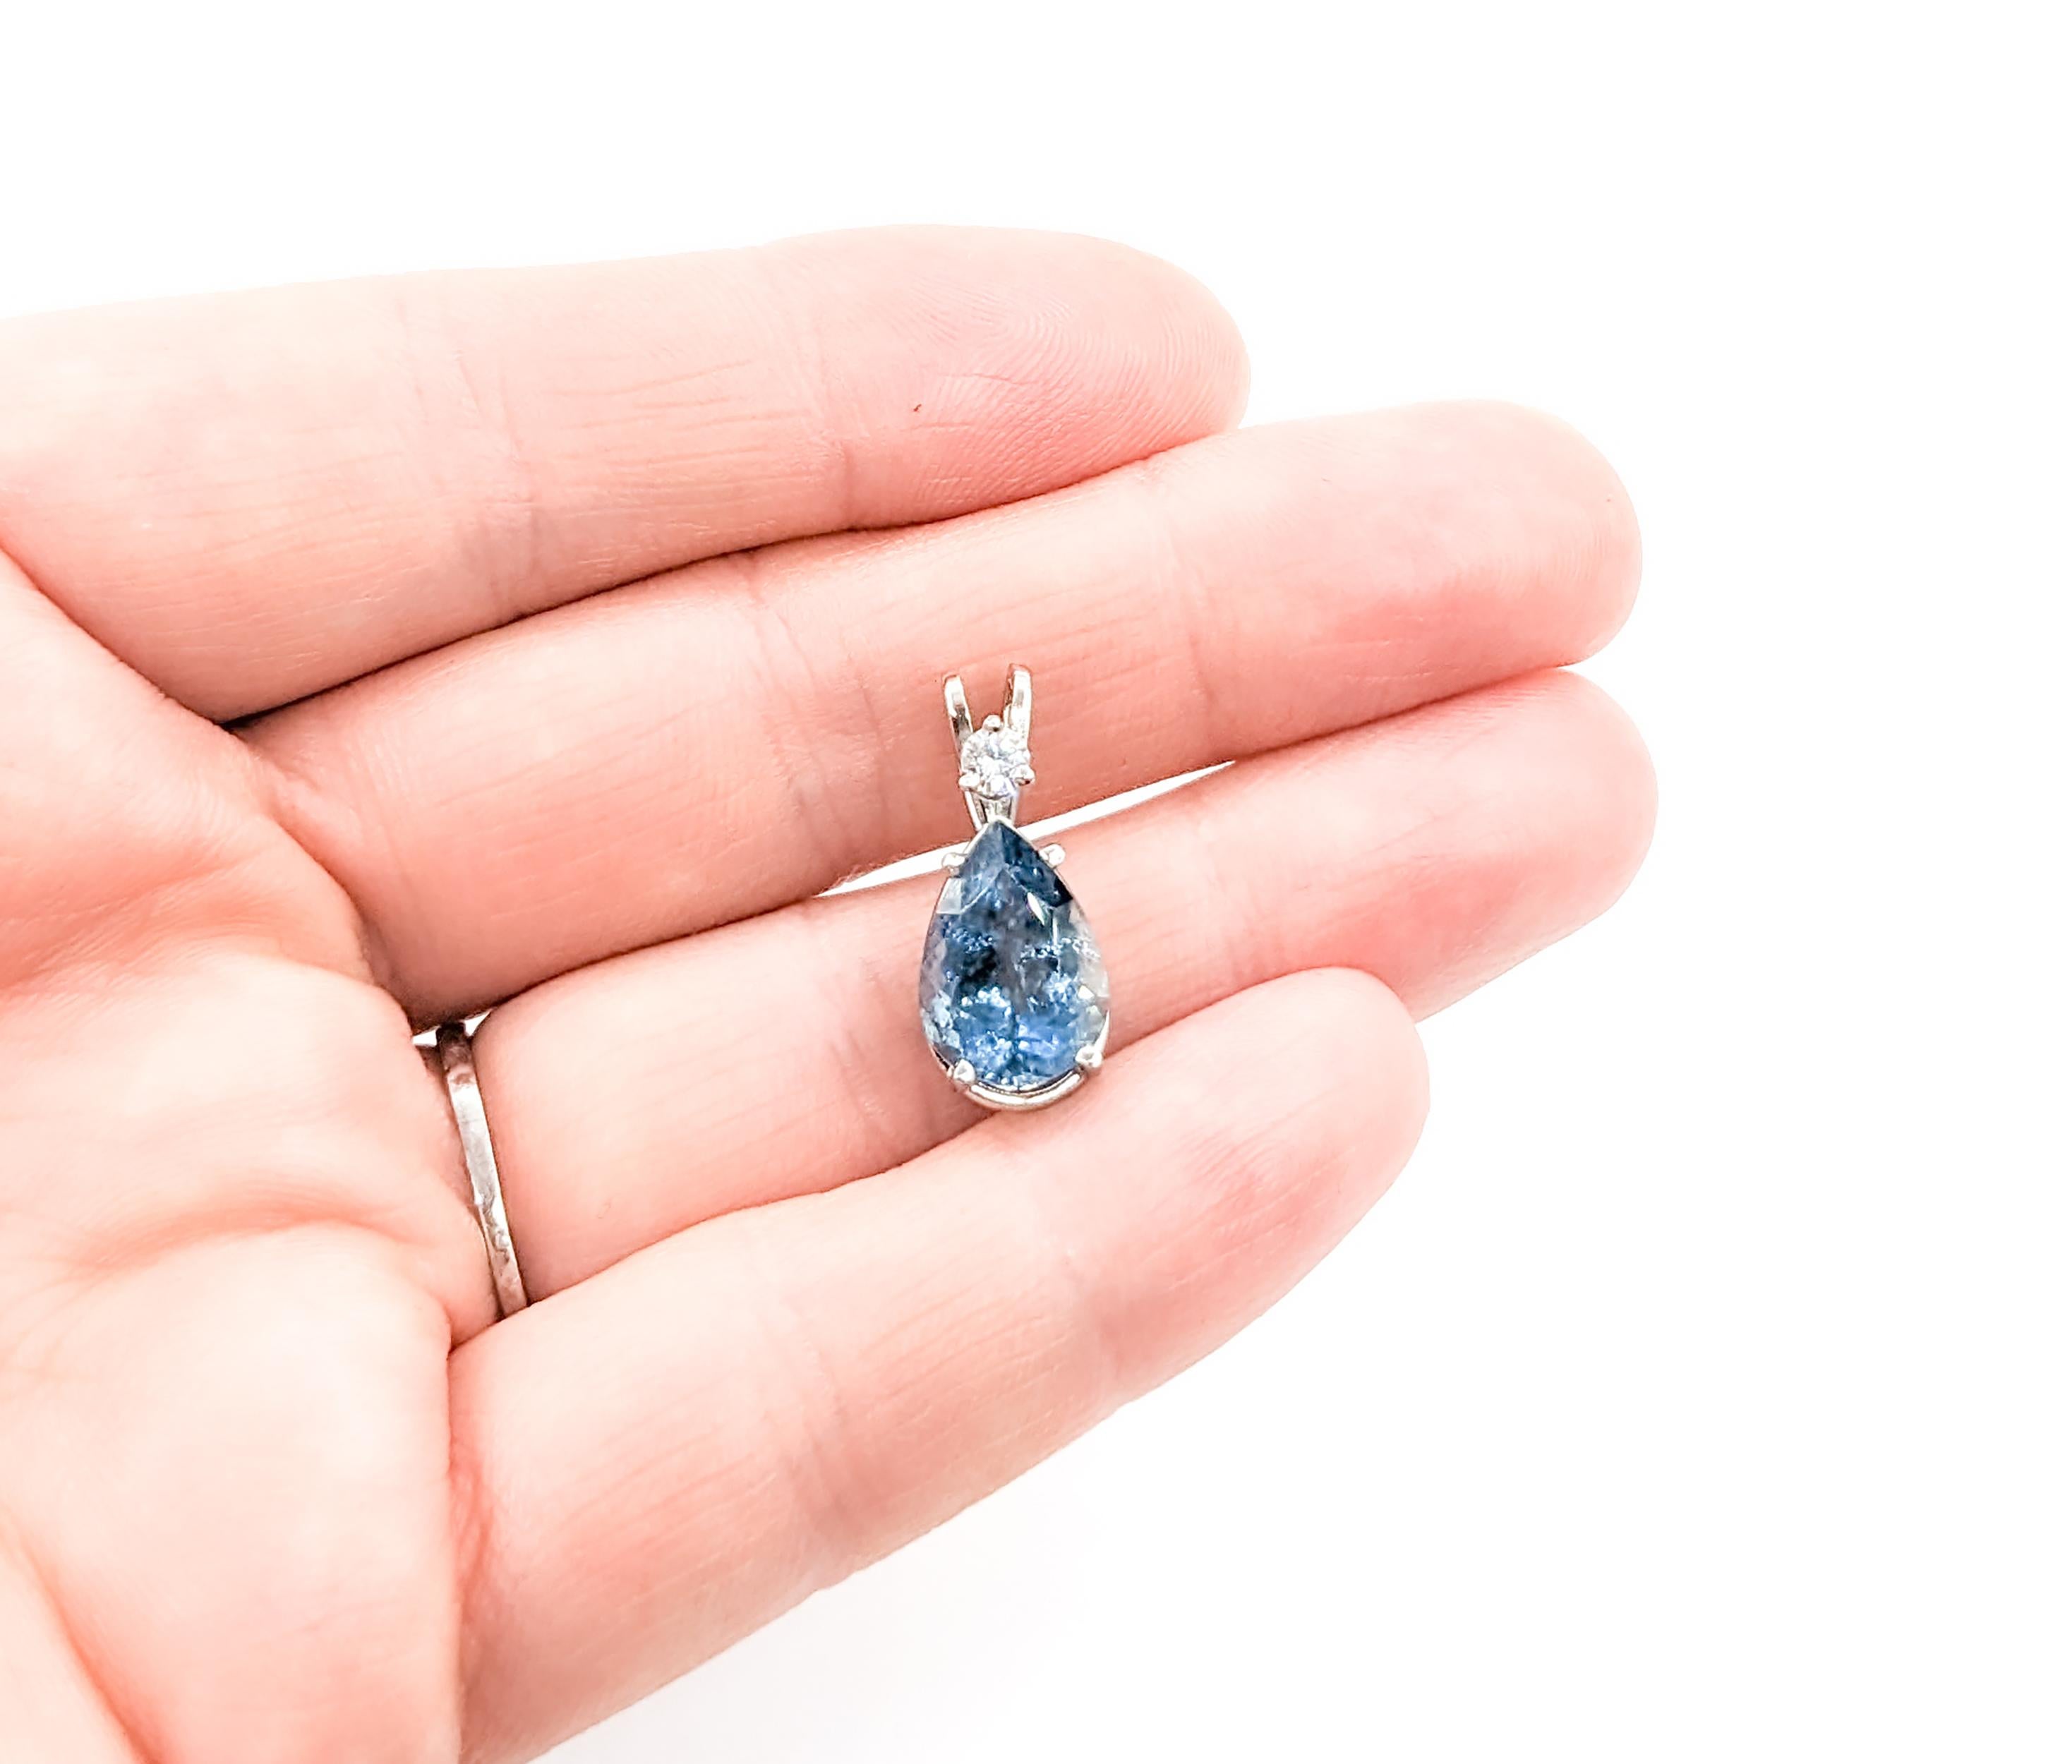 Vibrant 3.4ct Aquamarine & Diamond Platinum Pendant

Crafted from 950 platinum, this exquisite pendant showcases a stunning .12-carat round diamond with SI1 clarity and H-color. The pendant's centerpiece is a breathtaking 3.4 carat pear-cut